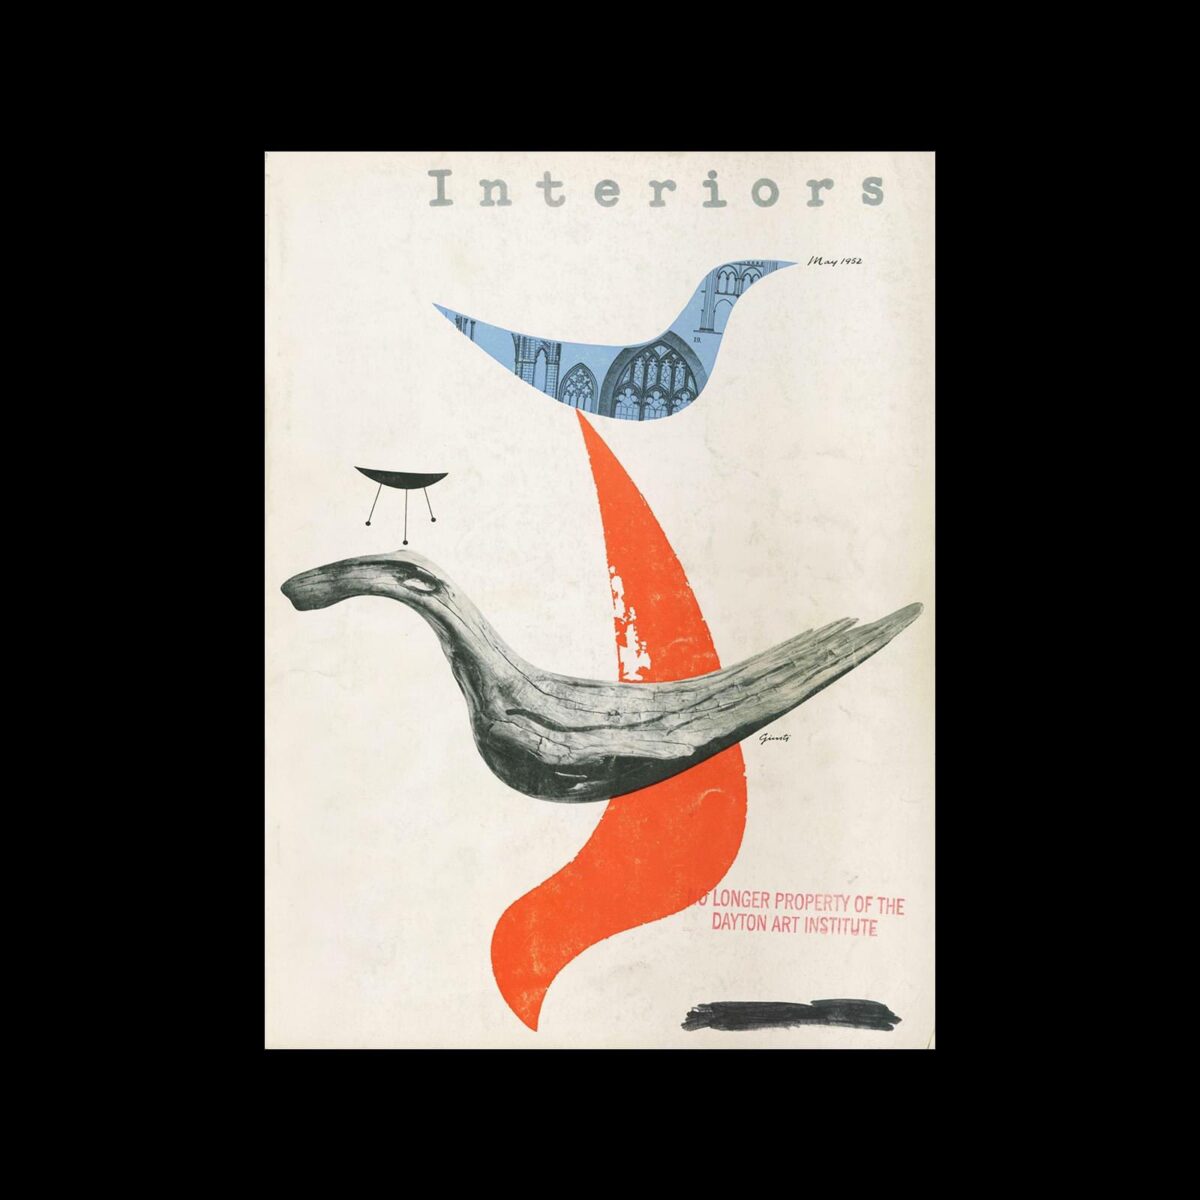 Interiors, May 1952. Cover design by George Giusti